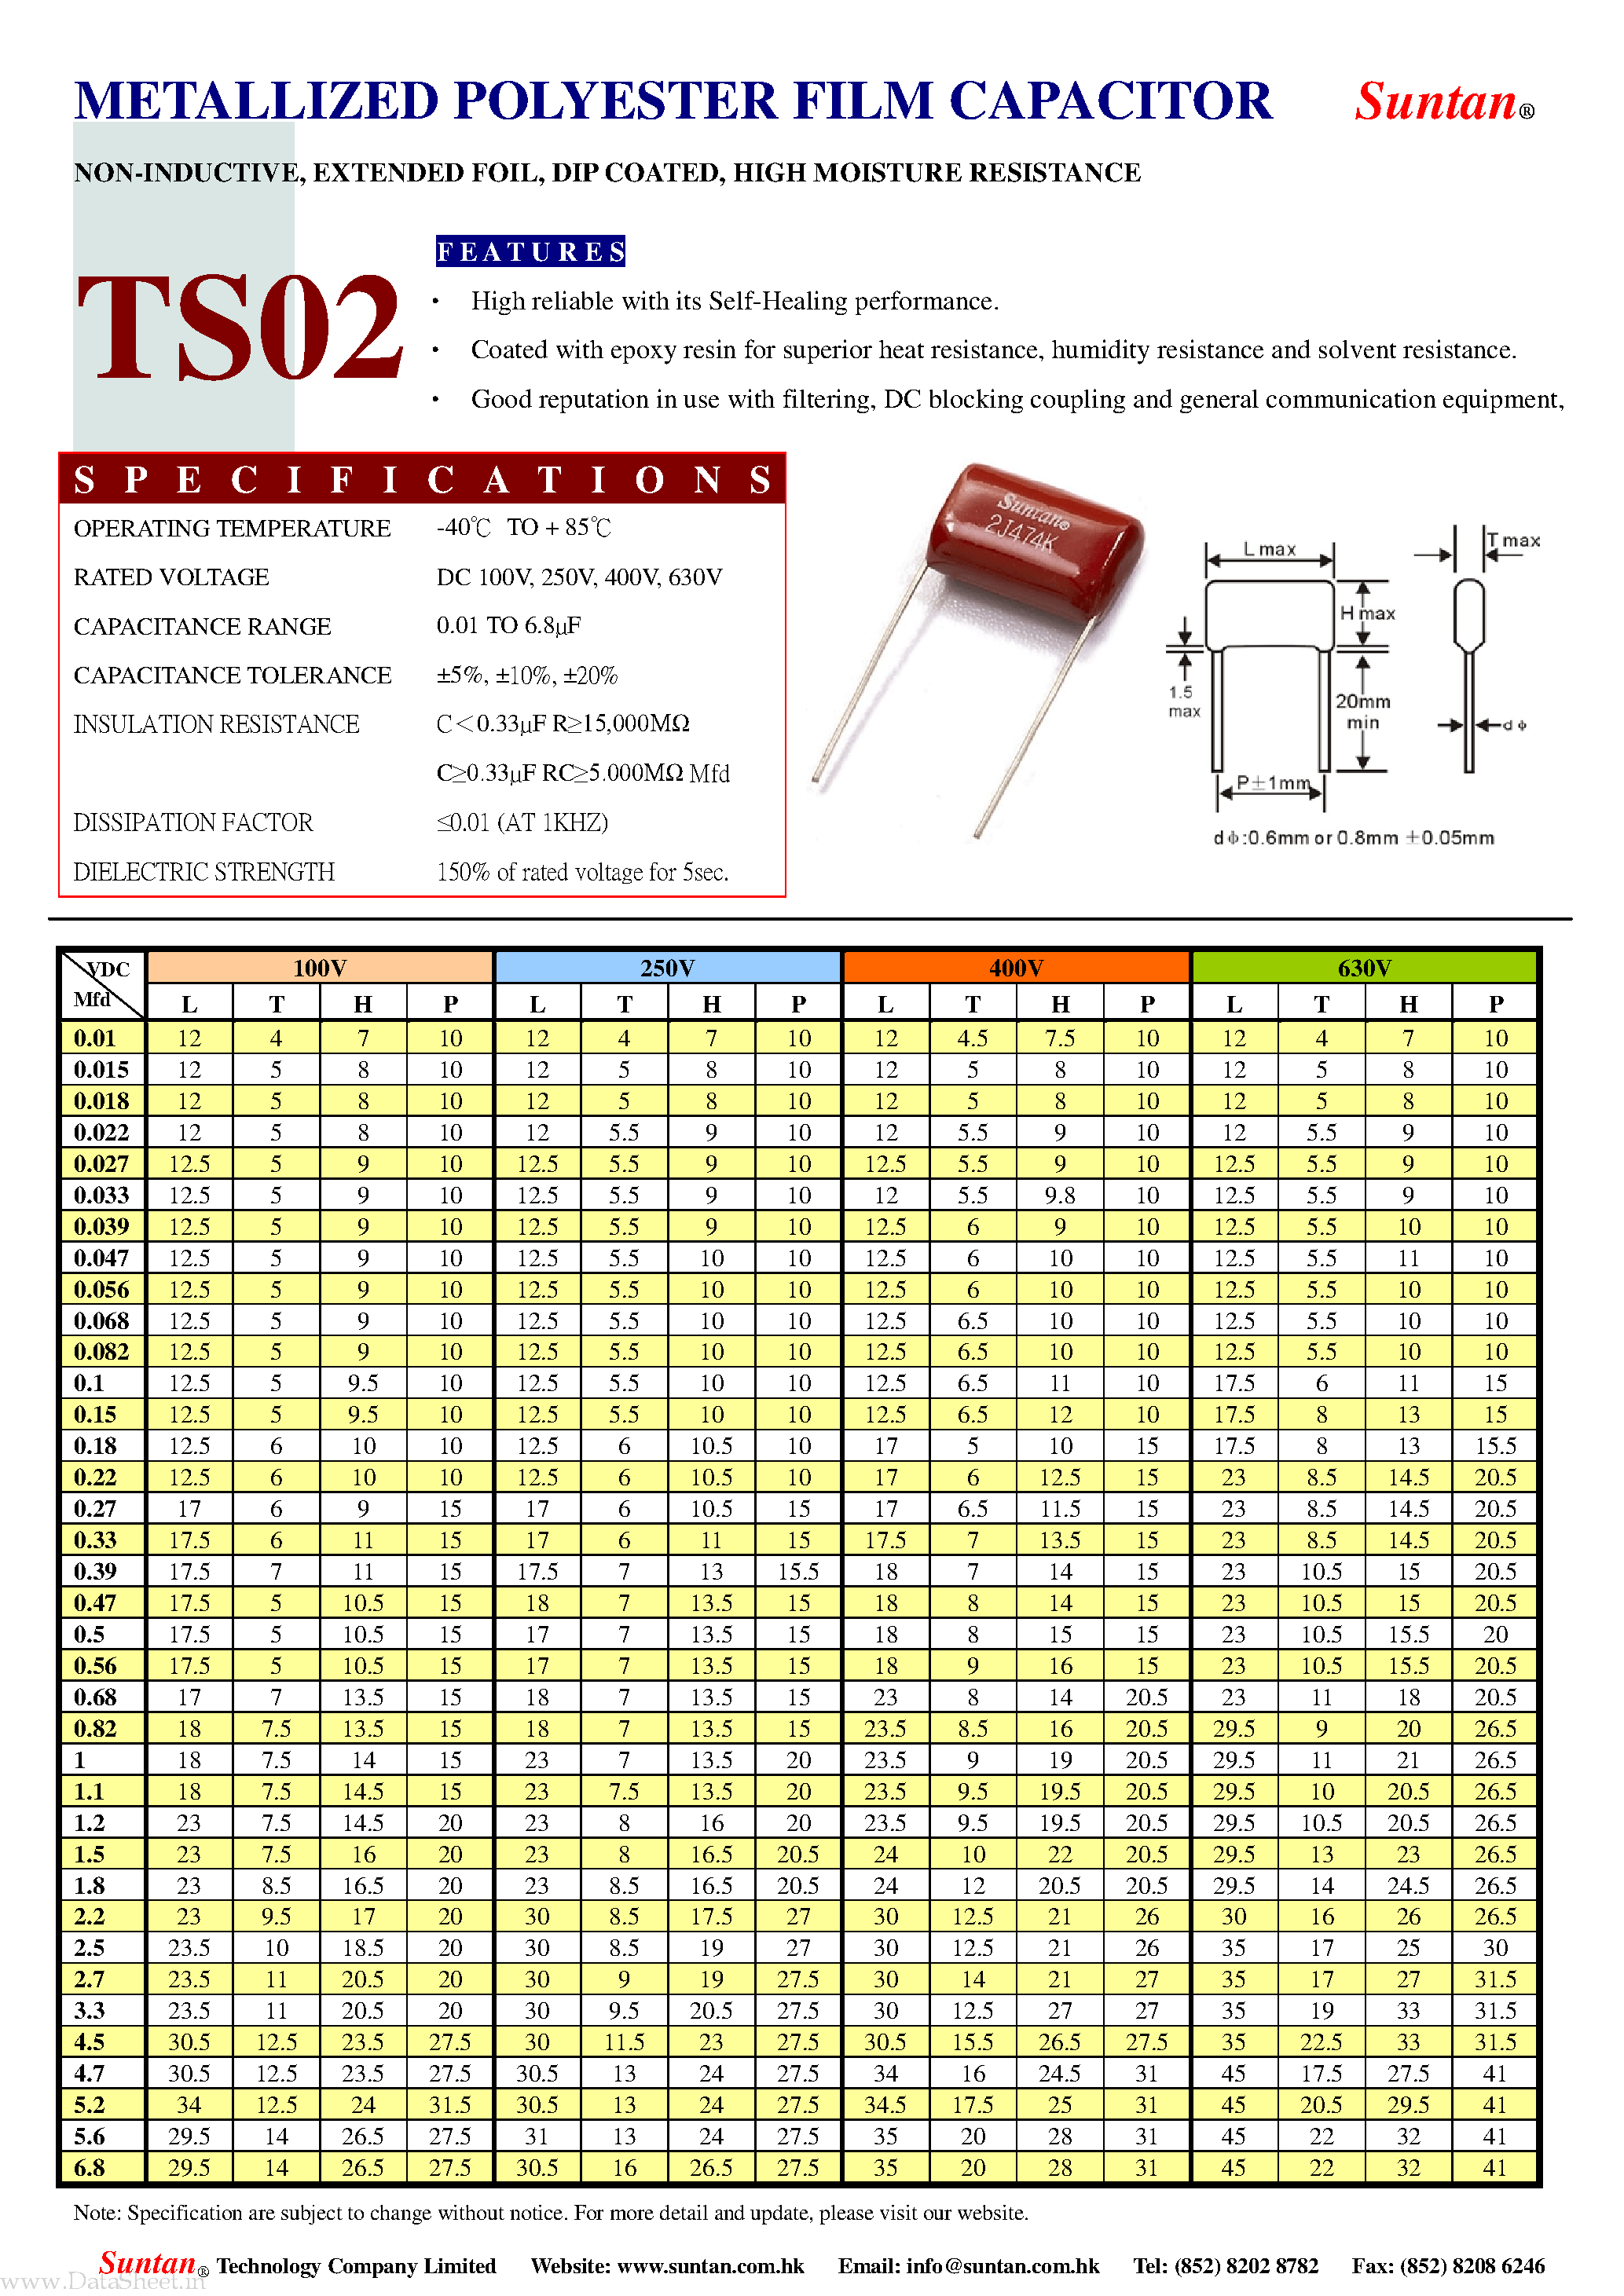 Даташит TS02 - METALLIZED POLYESTER FILM CAPACITOR страница 1